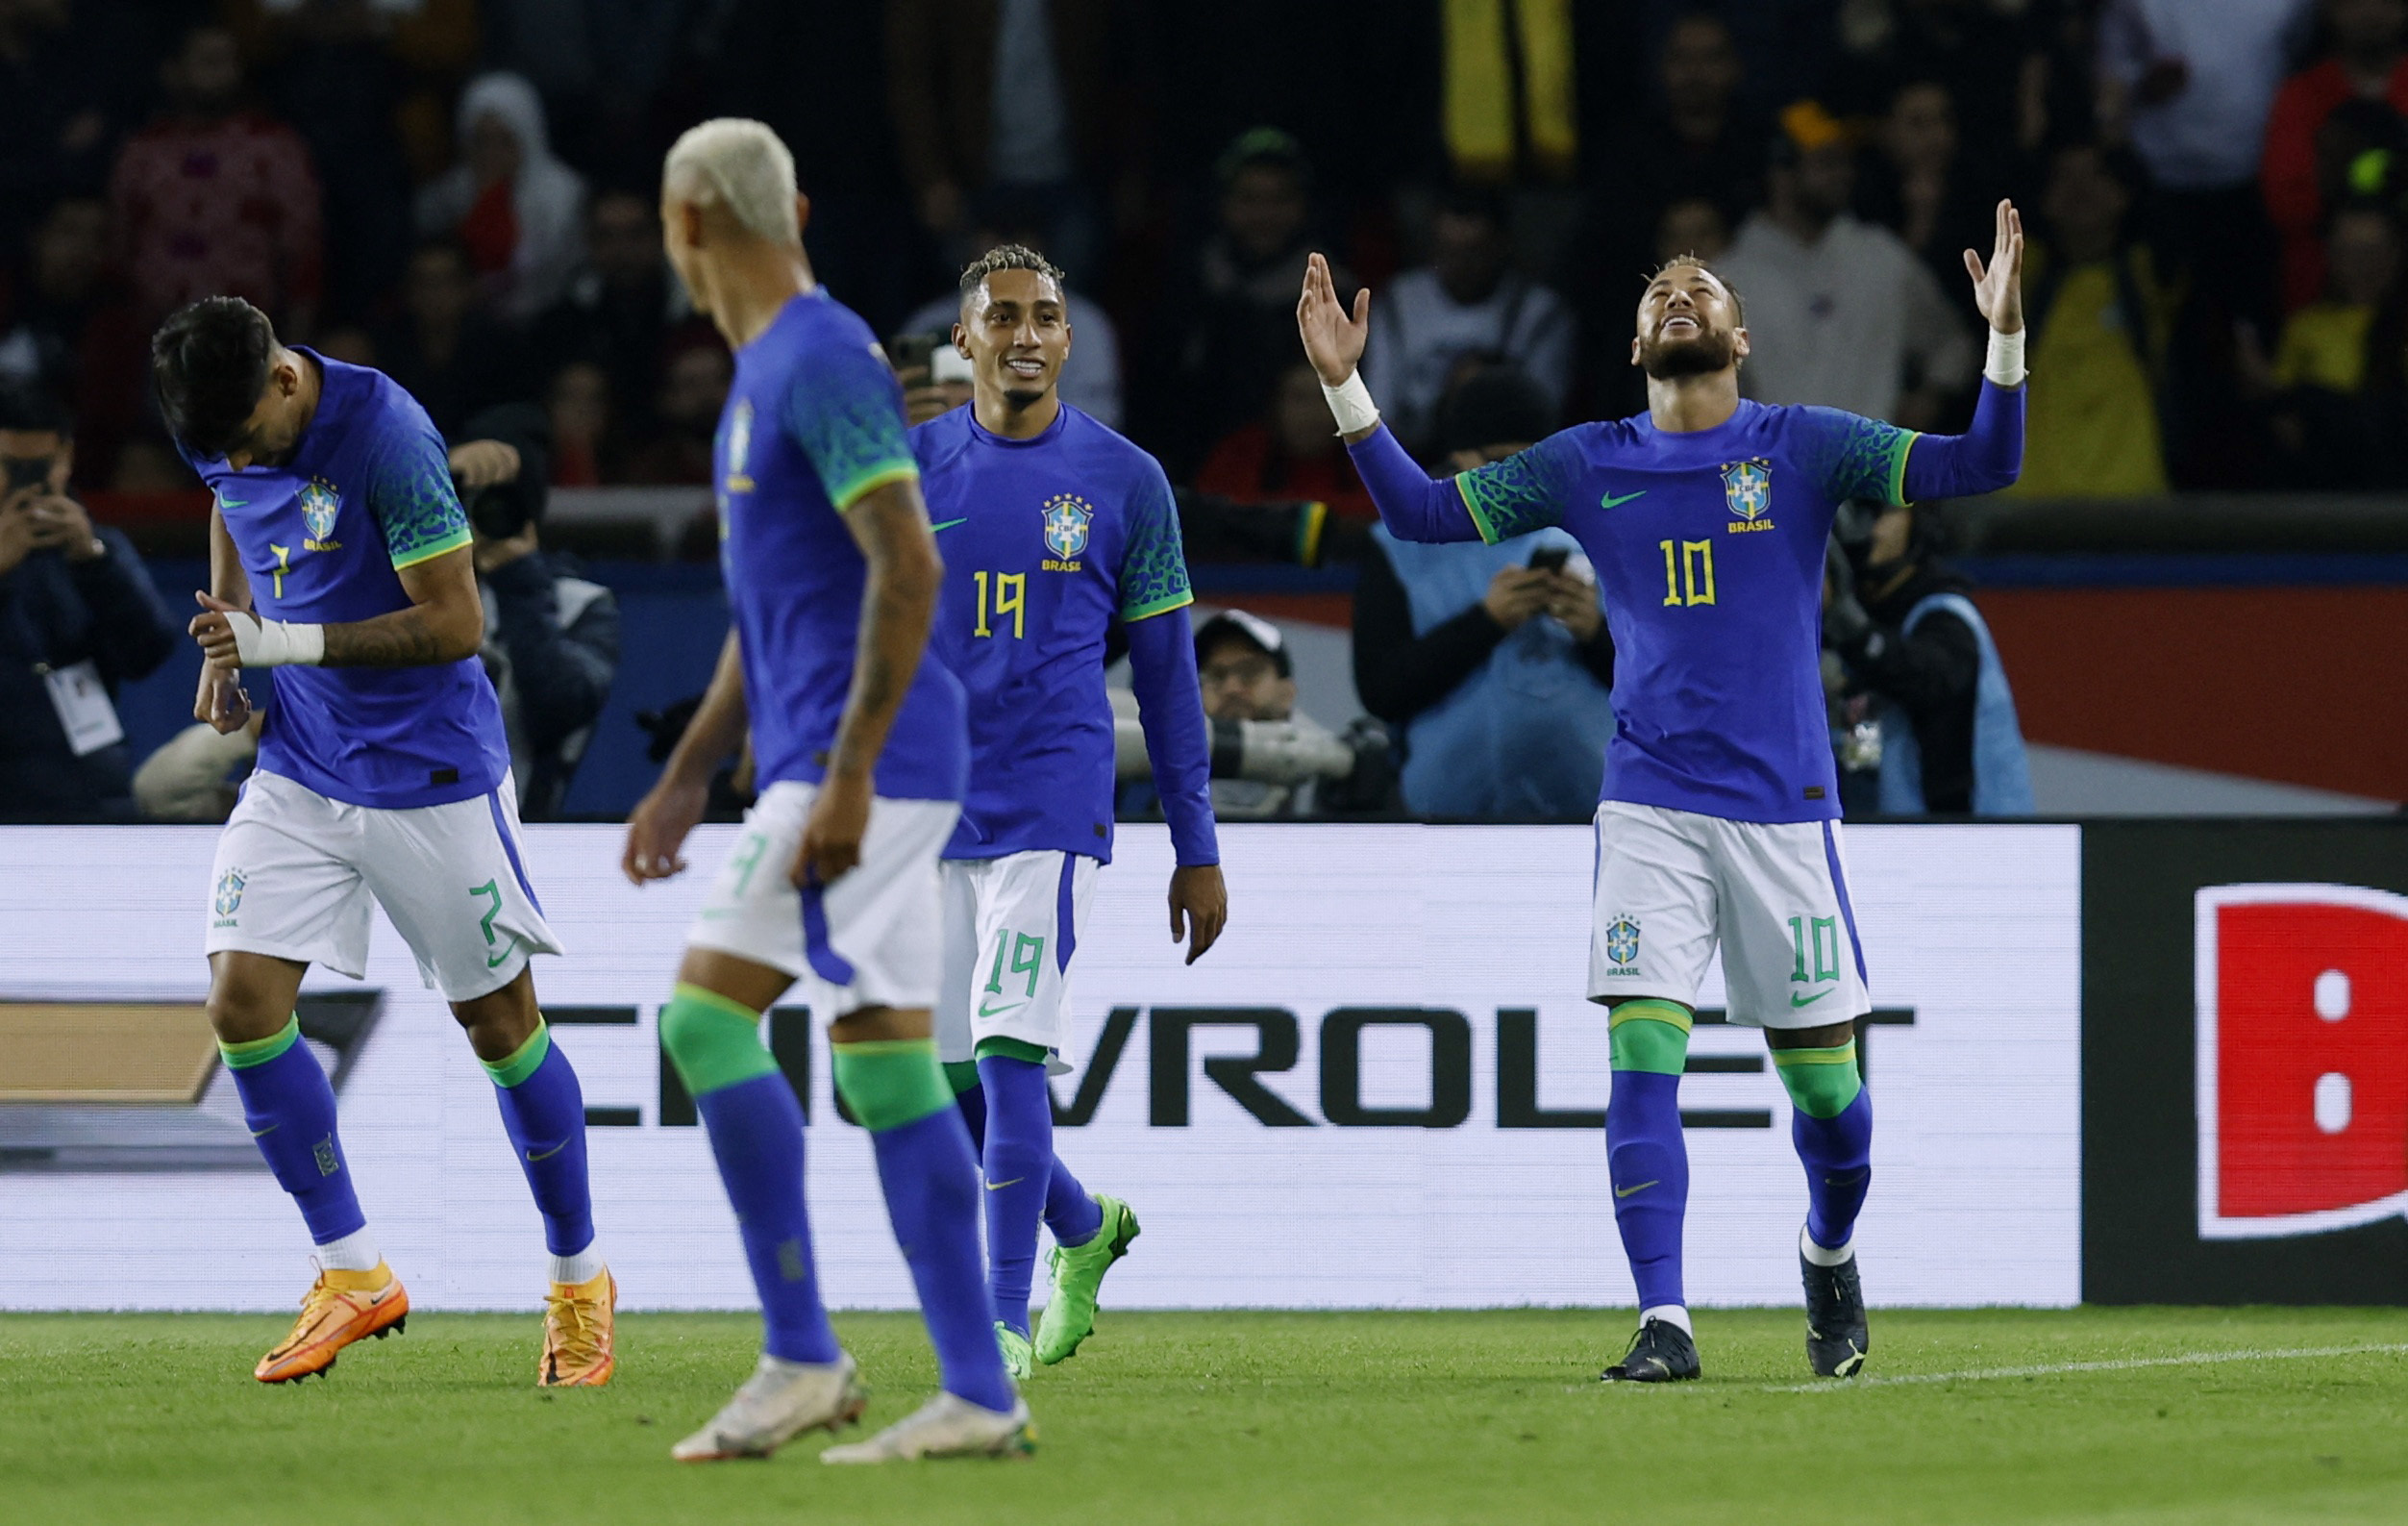 Brazil to play Ghana and Tunisia in friendlies ahead of World Cup